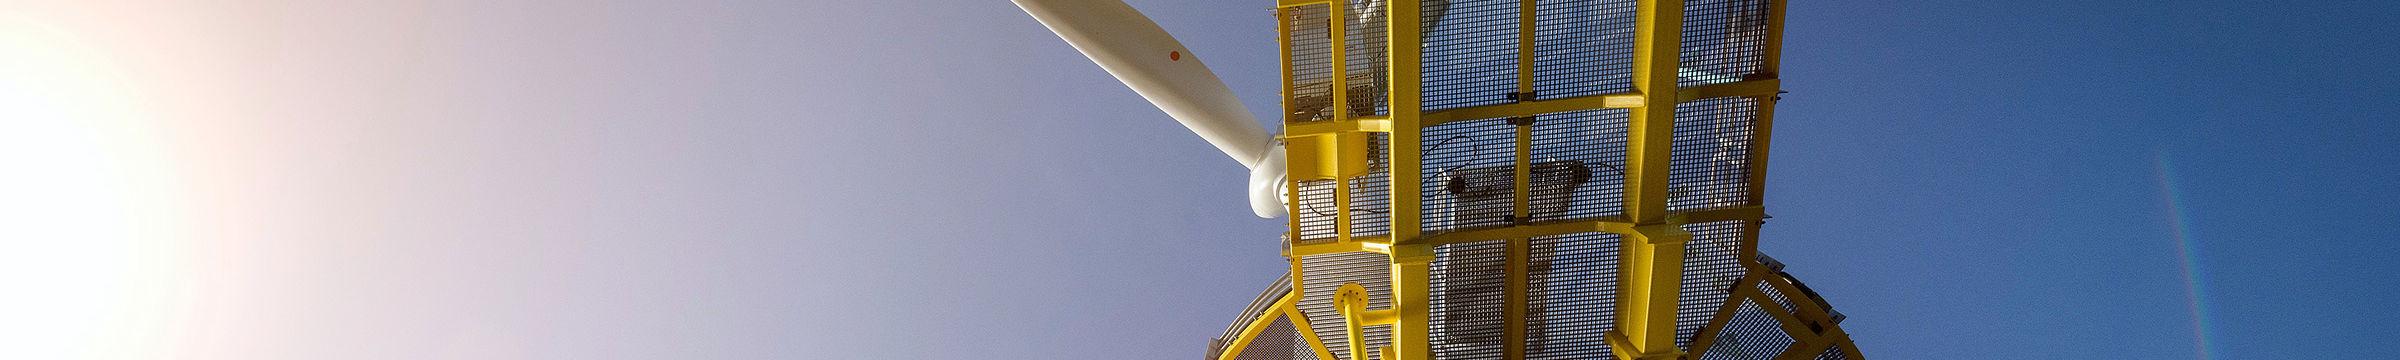 Close-up of the top of the wind turbine